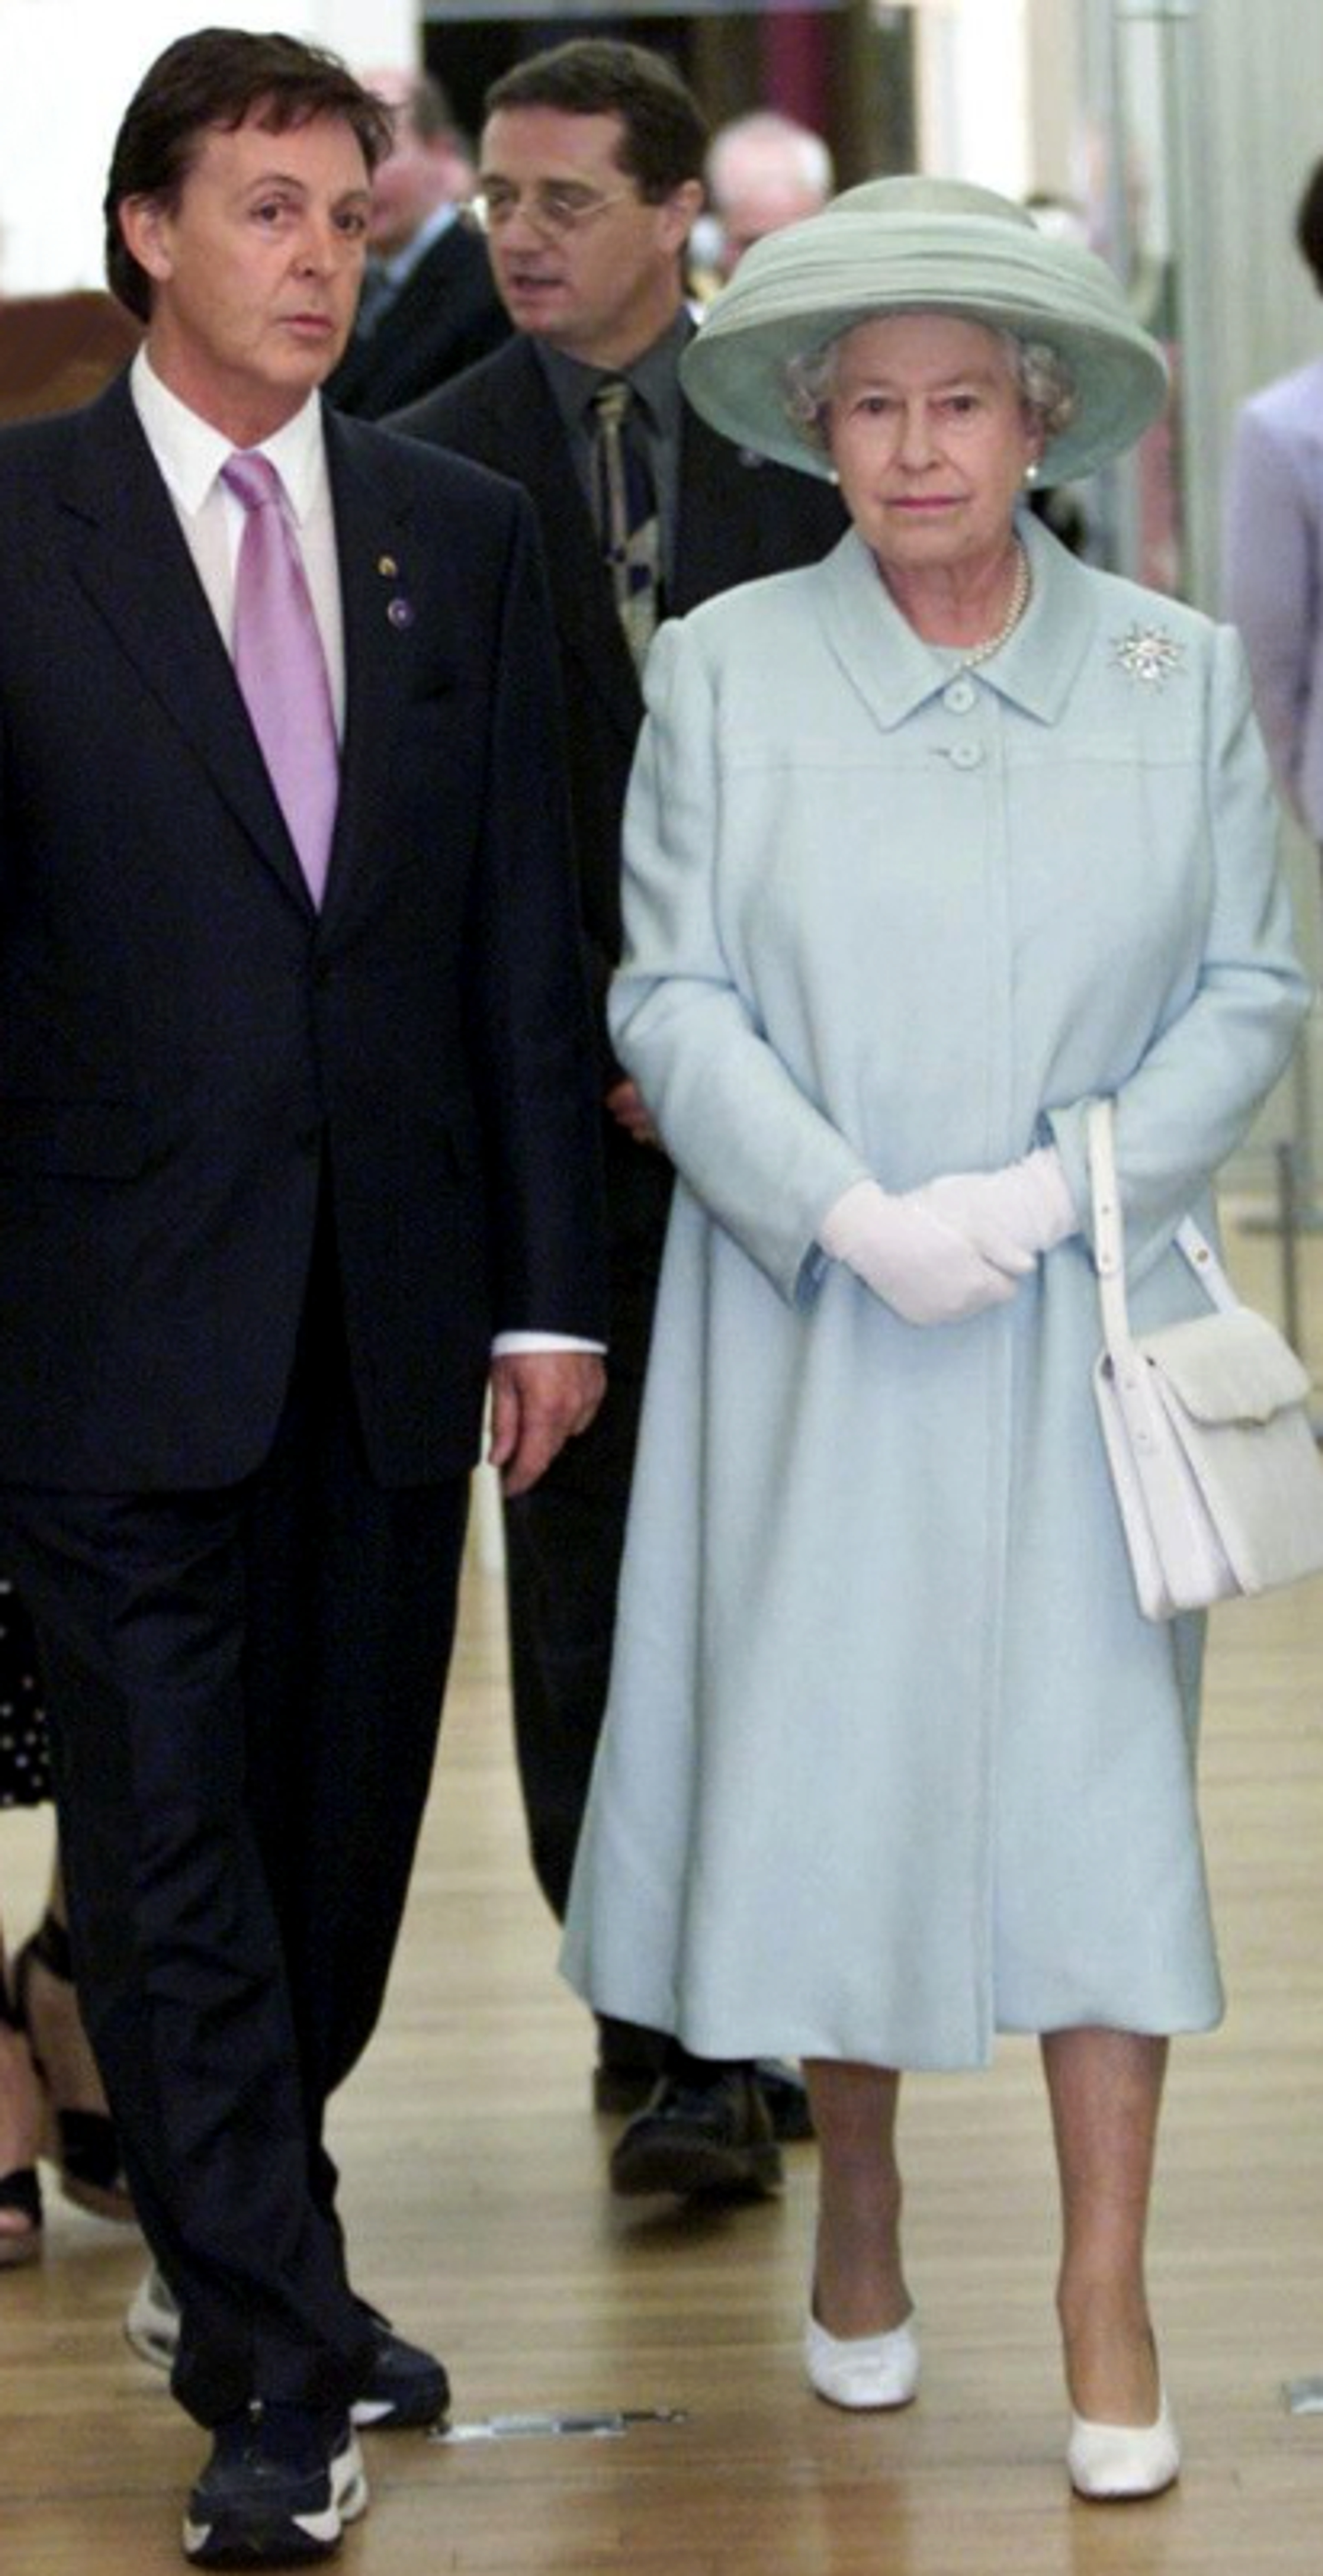 Photo of Paul McCartney and Queen Elizabeth at the Walker Art Gallery in Liverpool